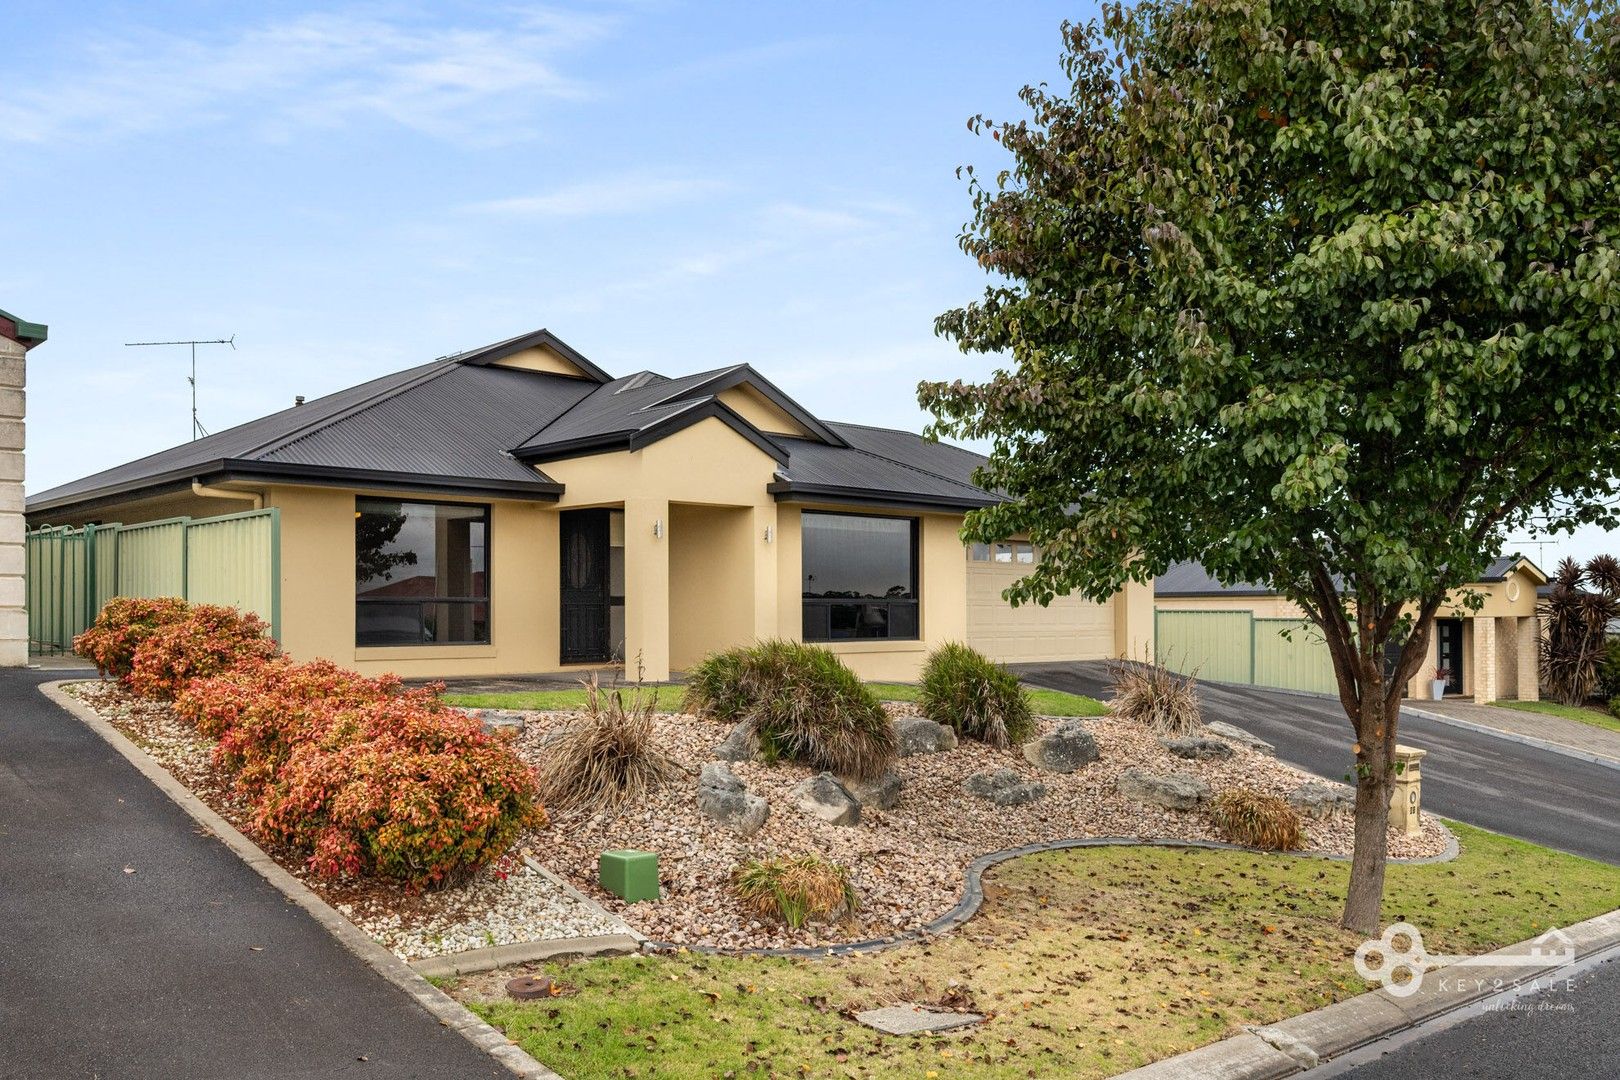 4 bedrooms House in 21 Stiles Street MOUNT GAMBIER SA, 5290